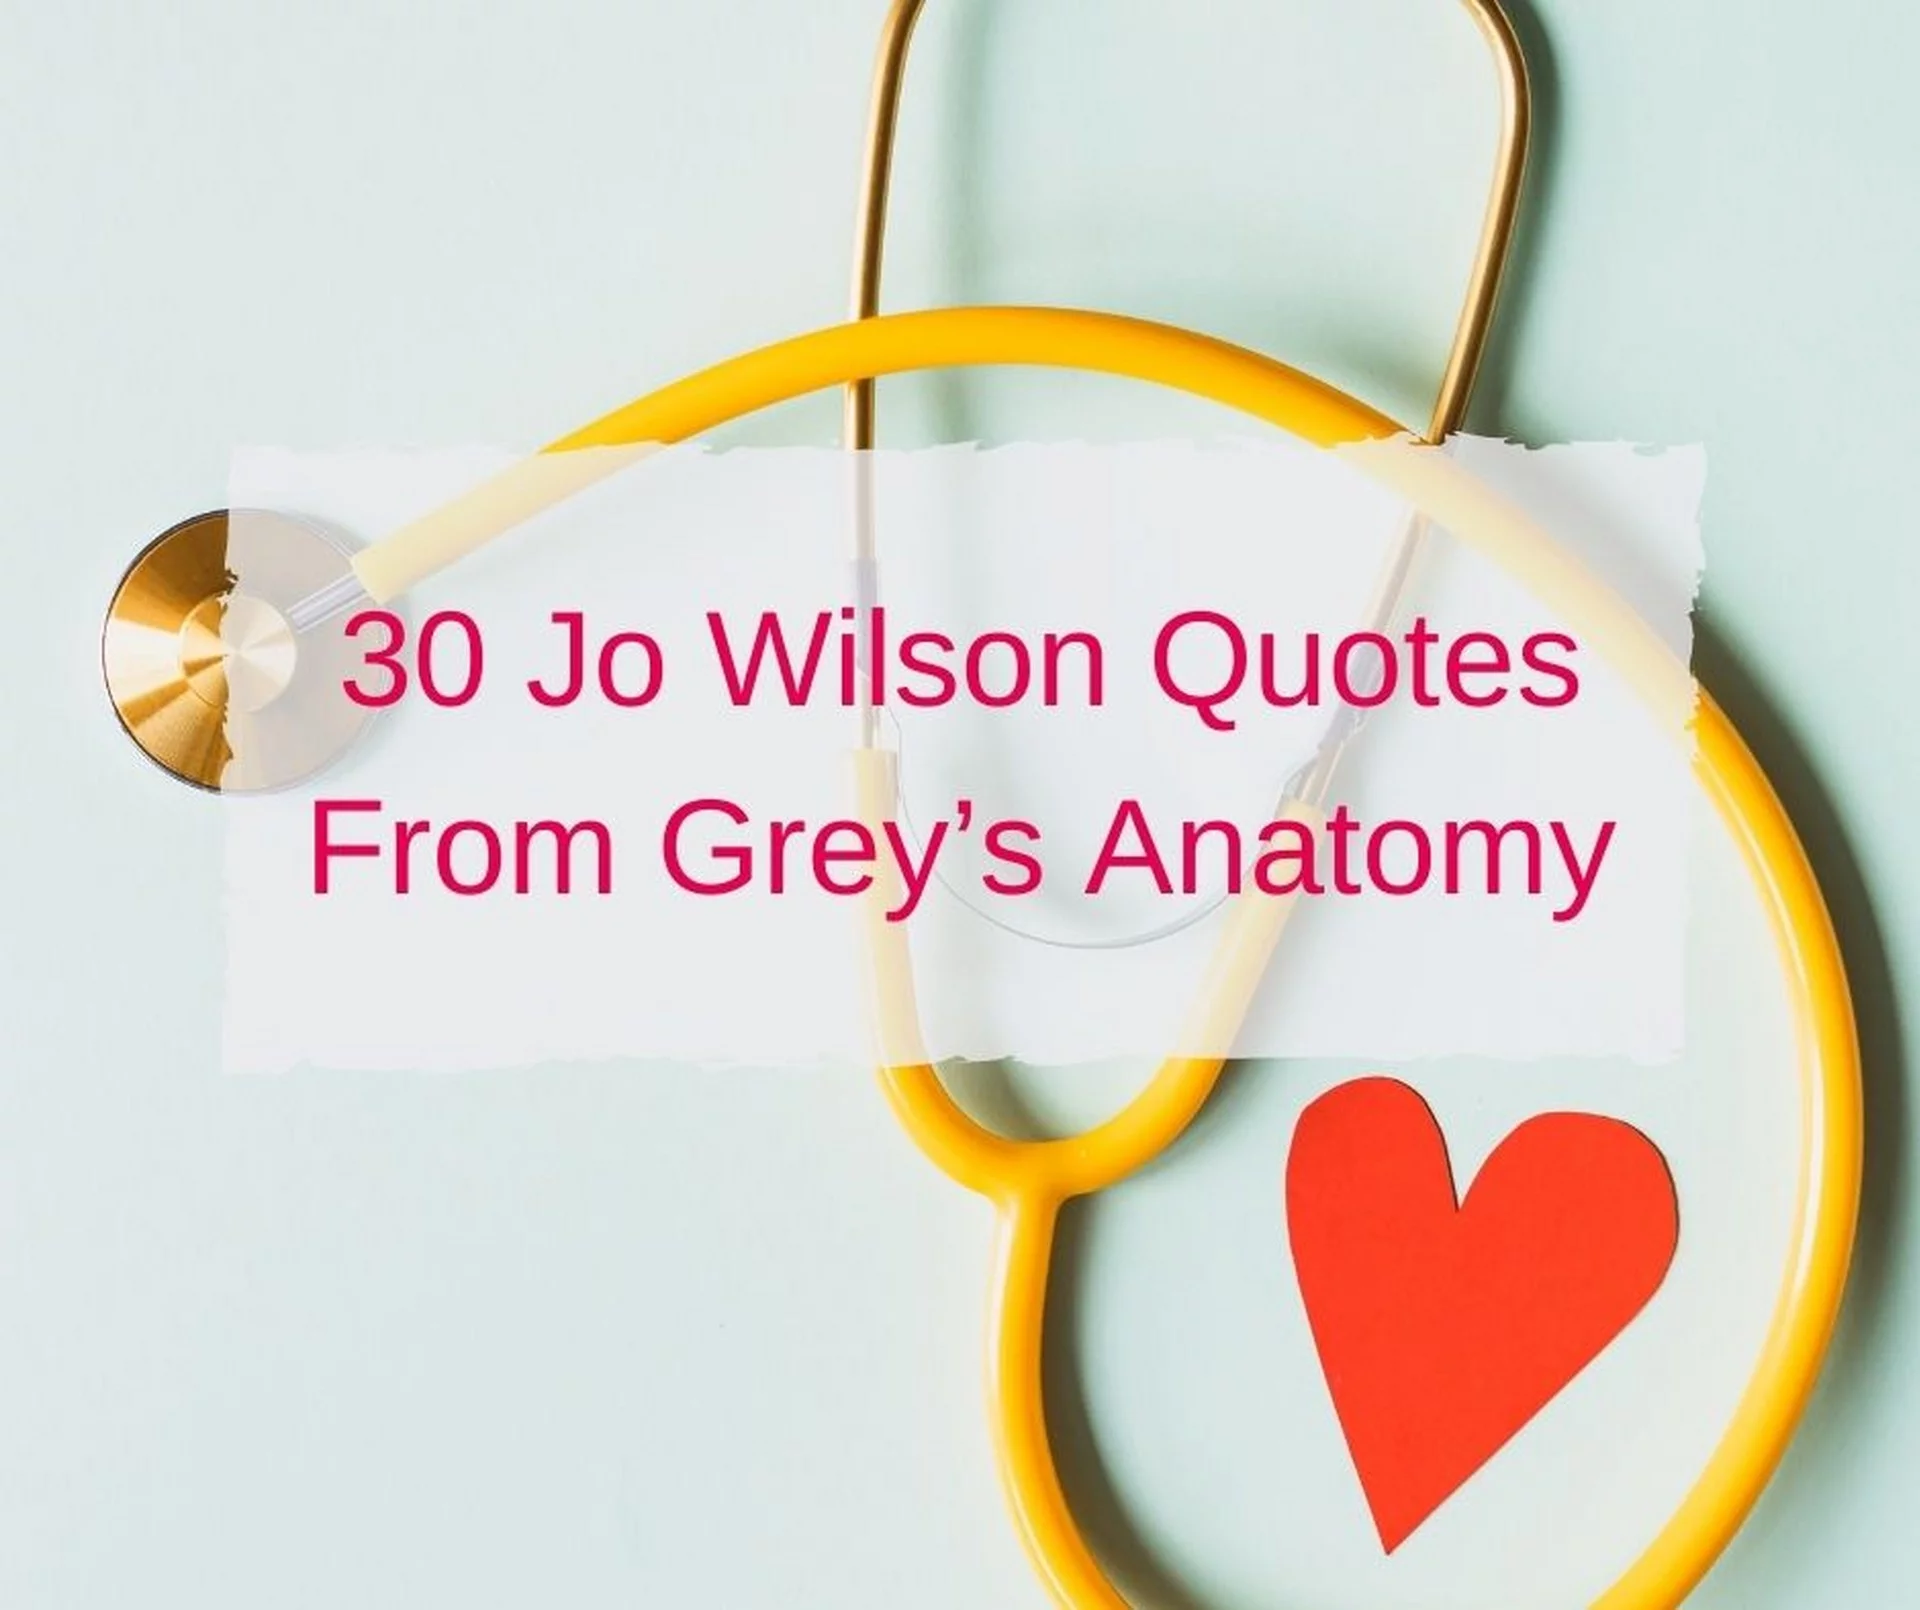 30 Jo Wilson Quotes From Grey’s Anatomy